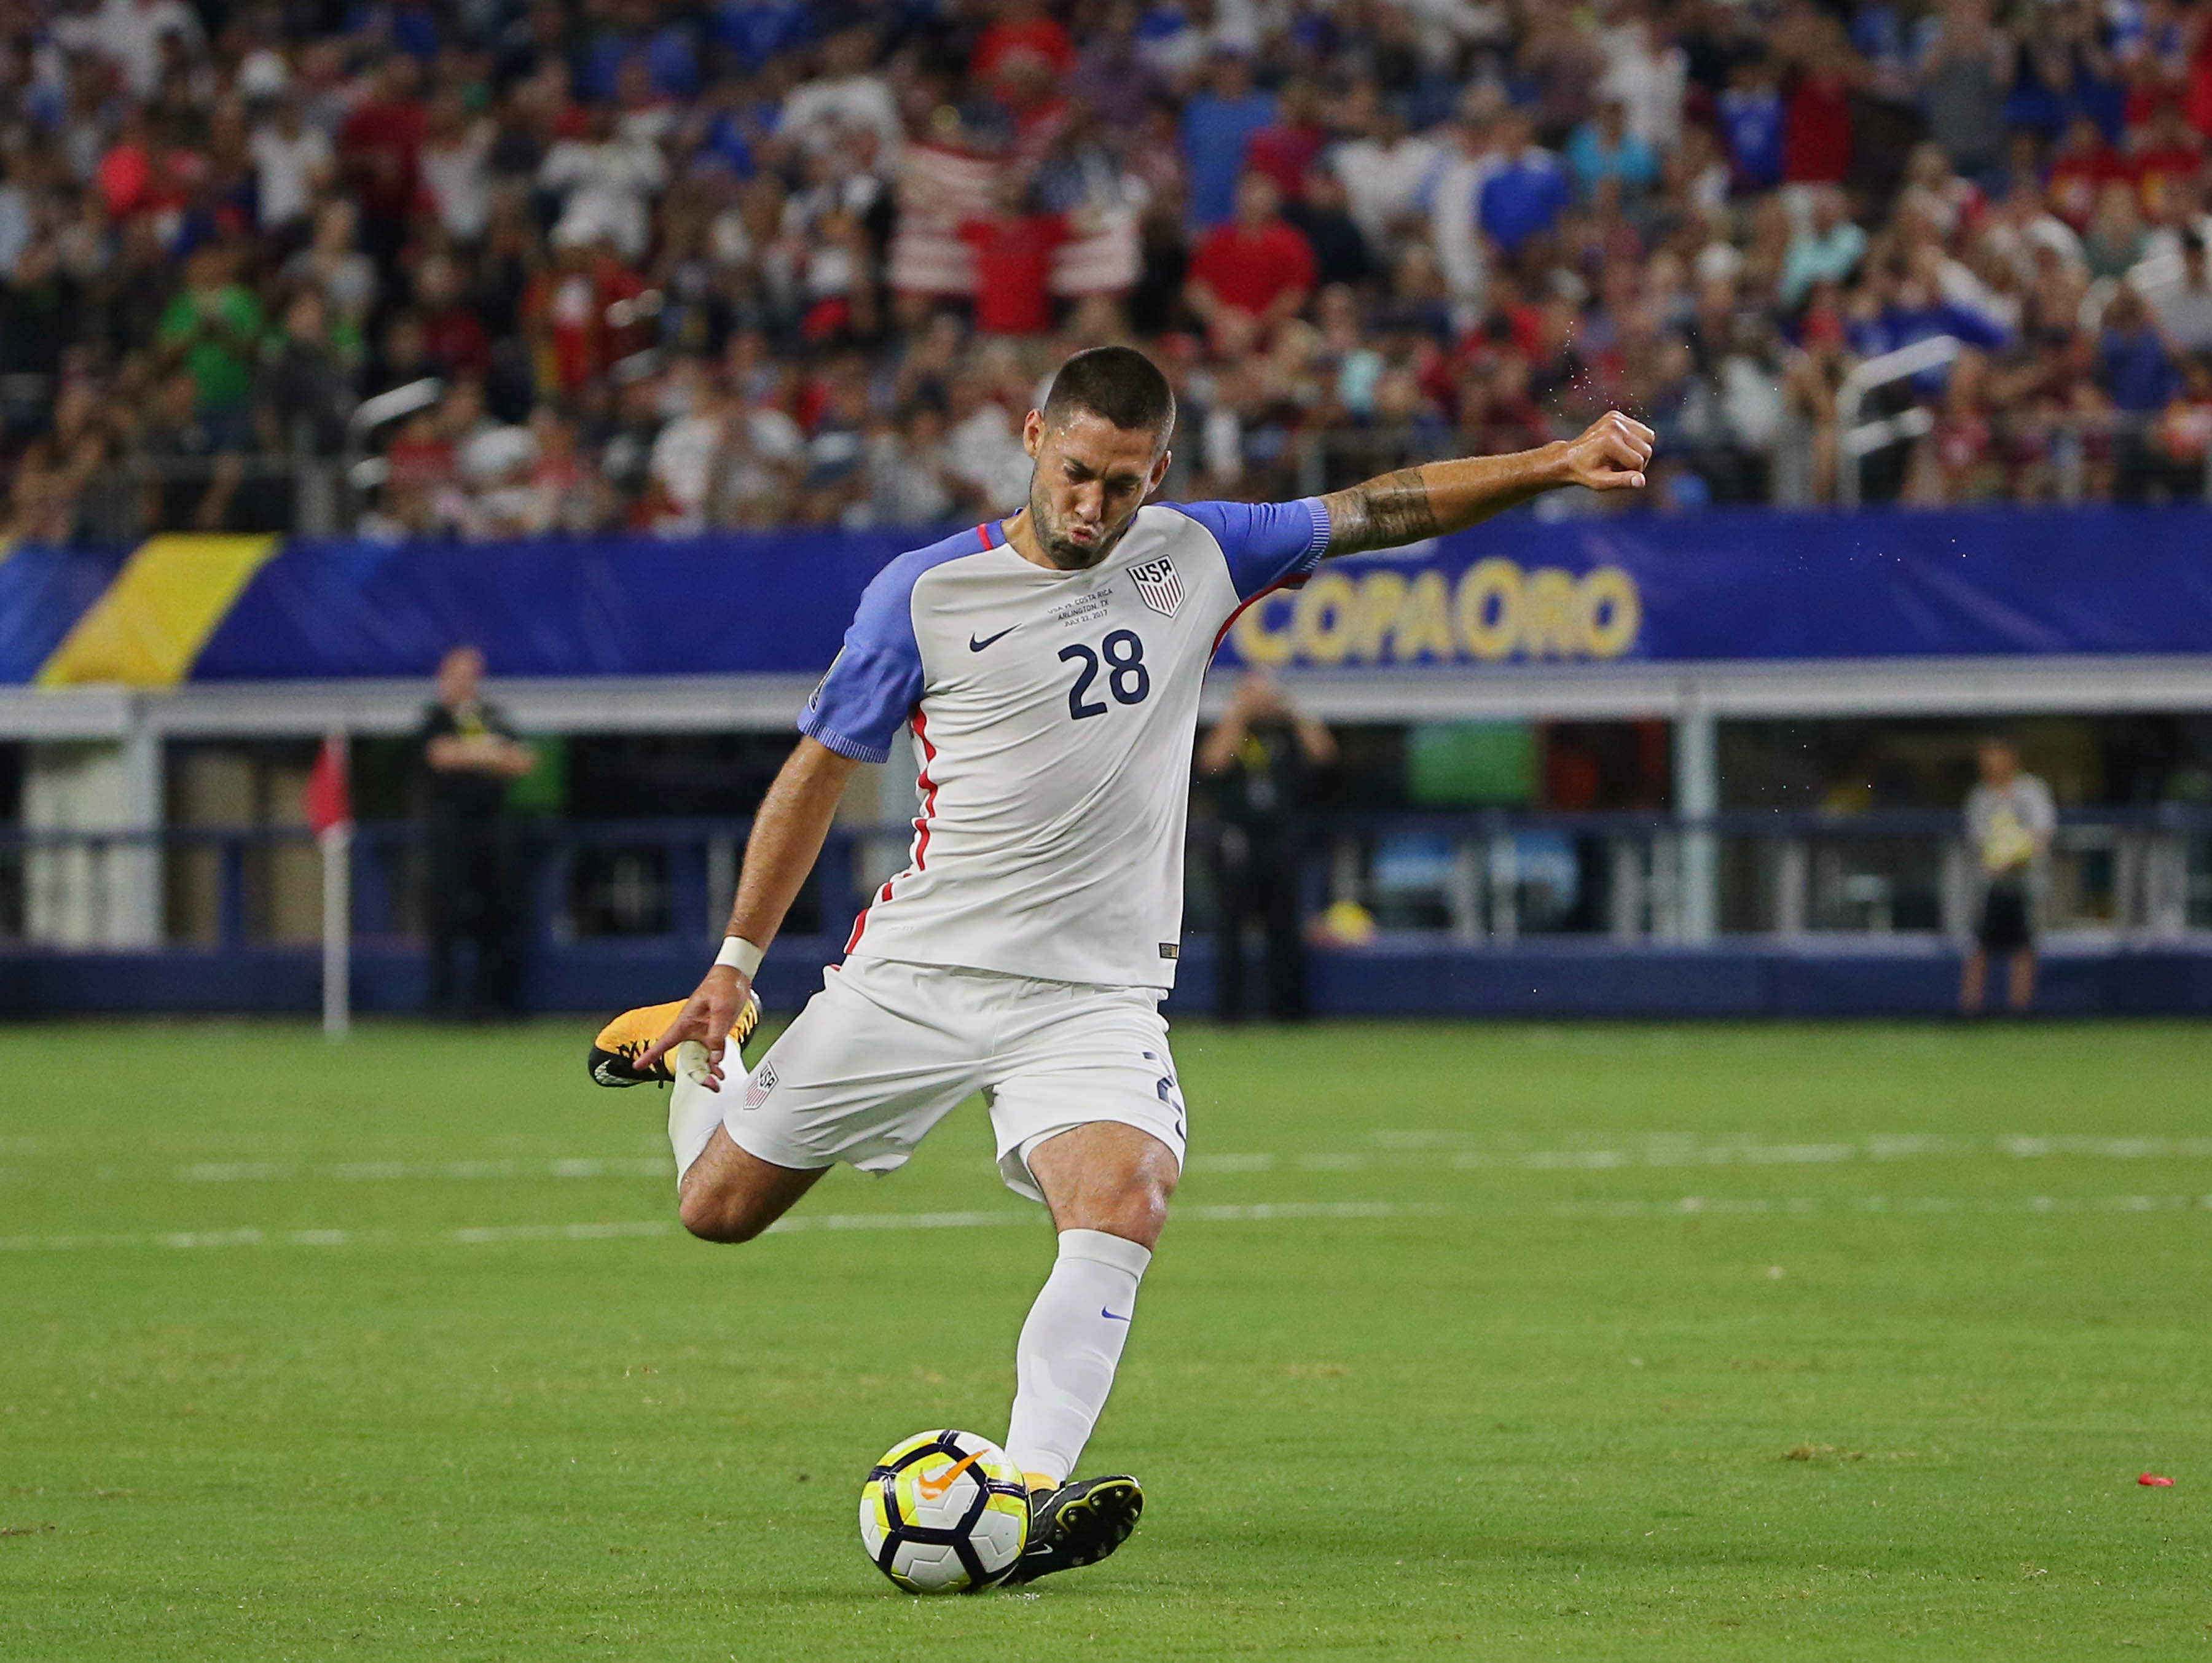 Clint Dempsey's record goal, assist leads US into Gold Cup final